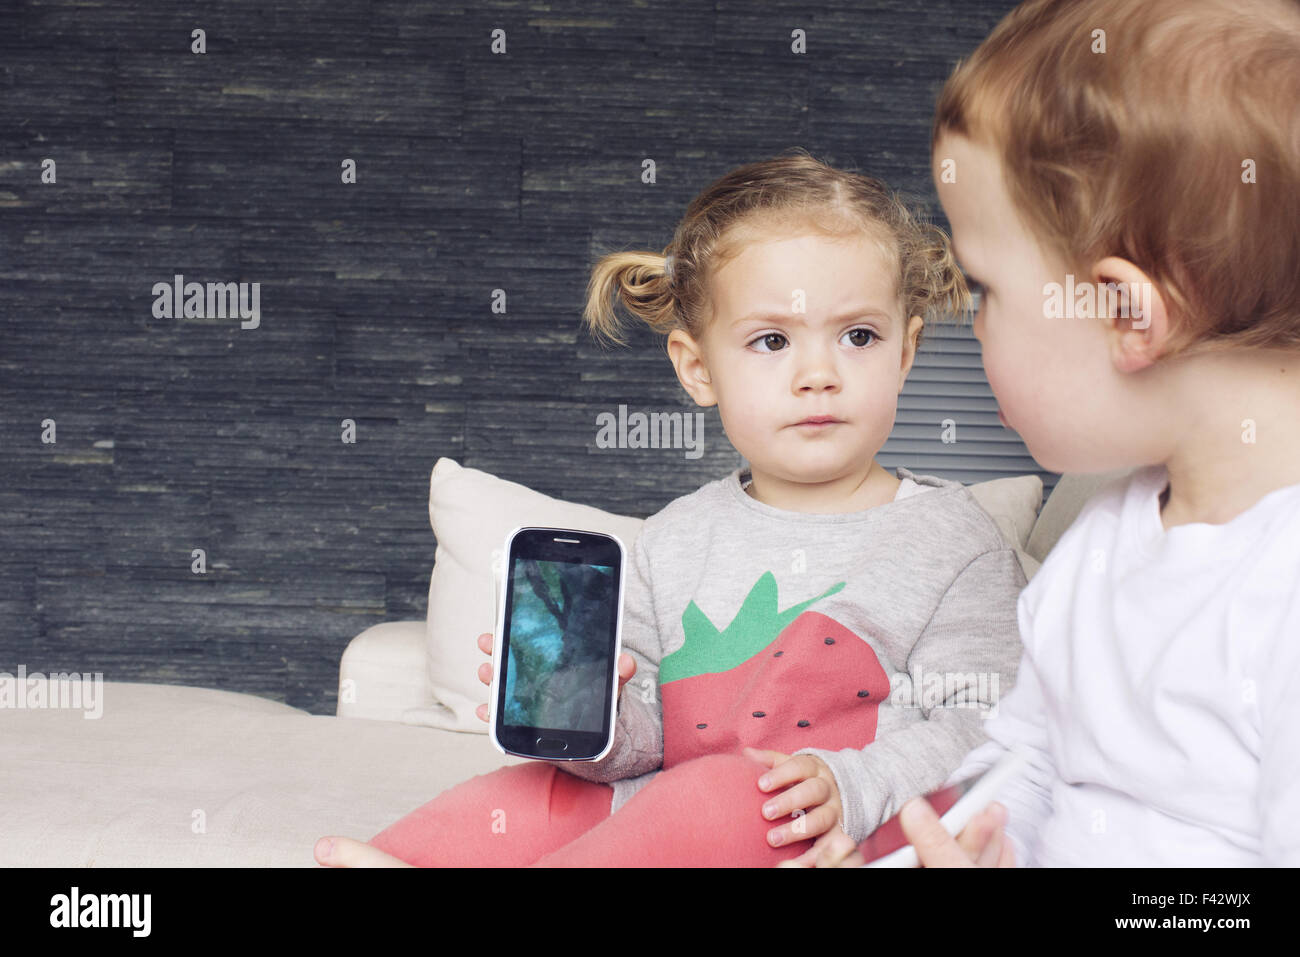 Little girl showing smartphone to her brother Stock Photo